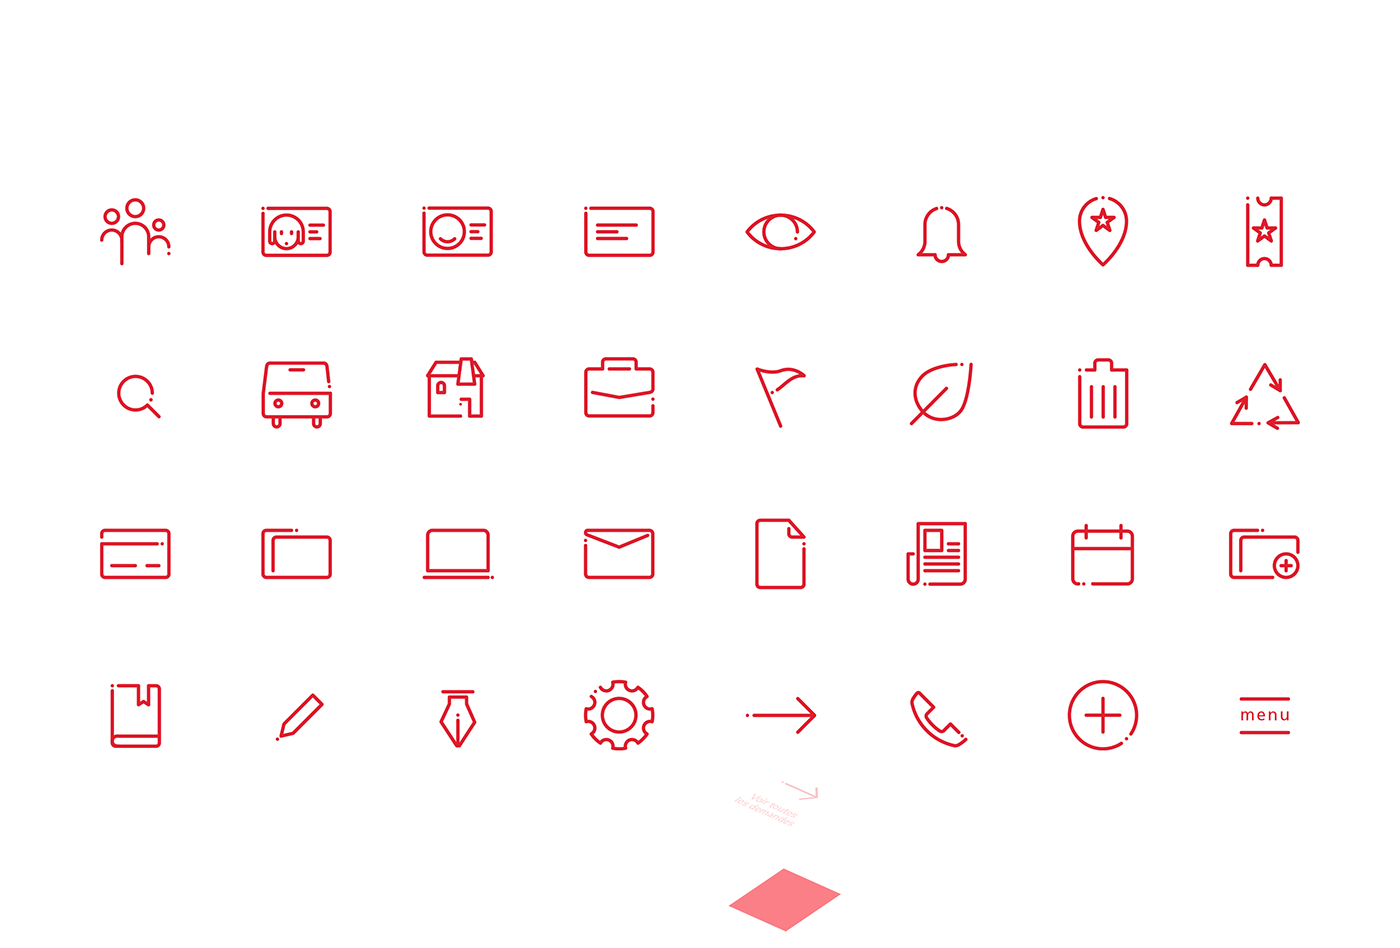 city of montreal iconography icons ILLUSTRATION  mobile Website